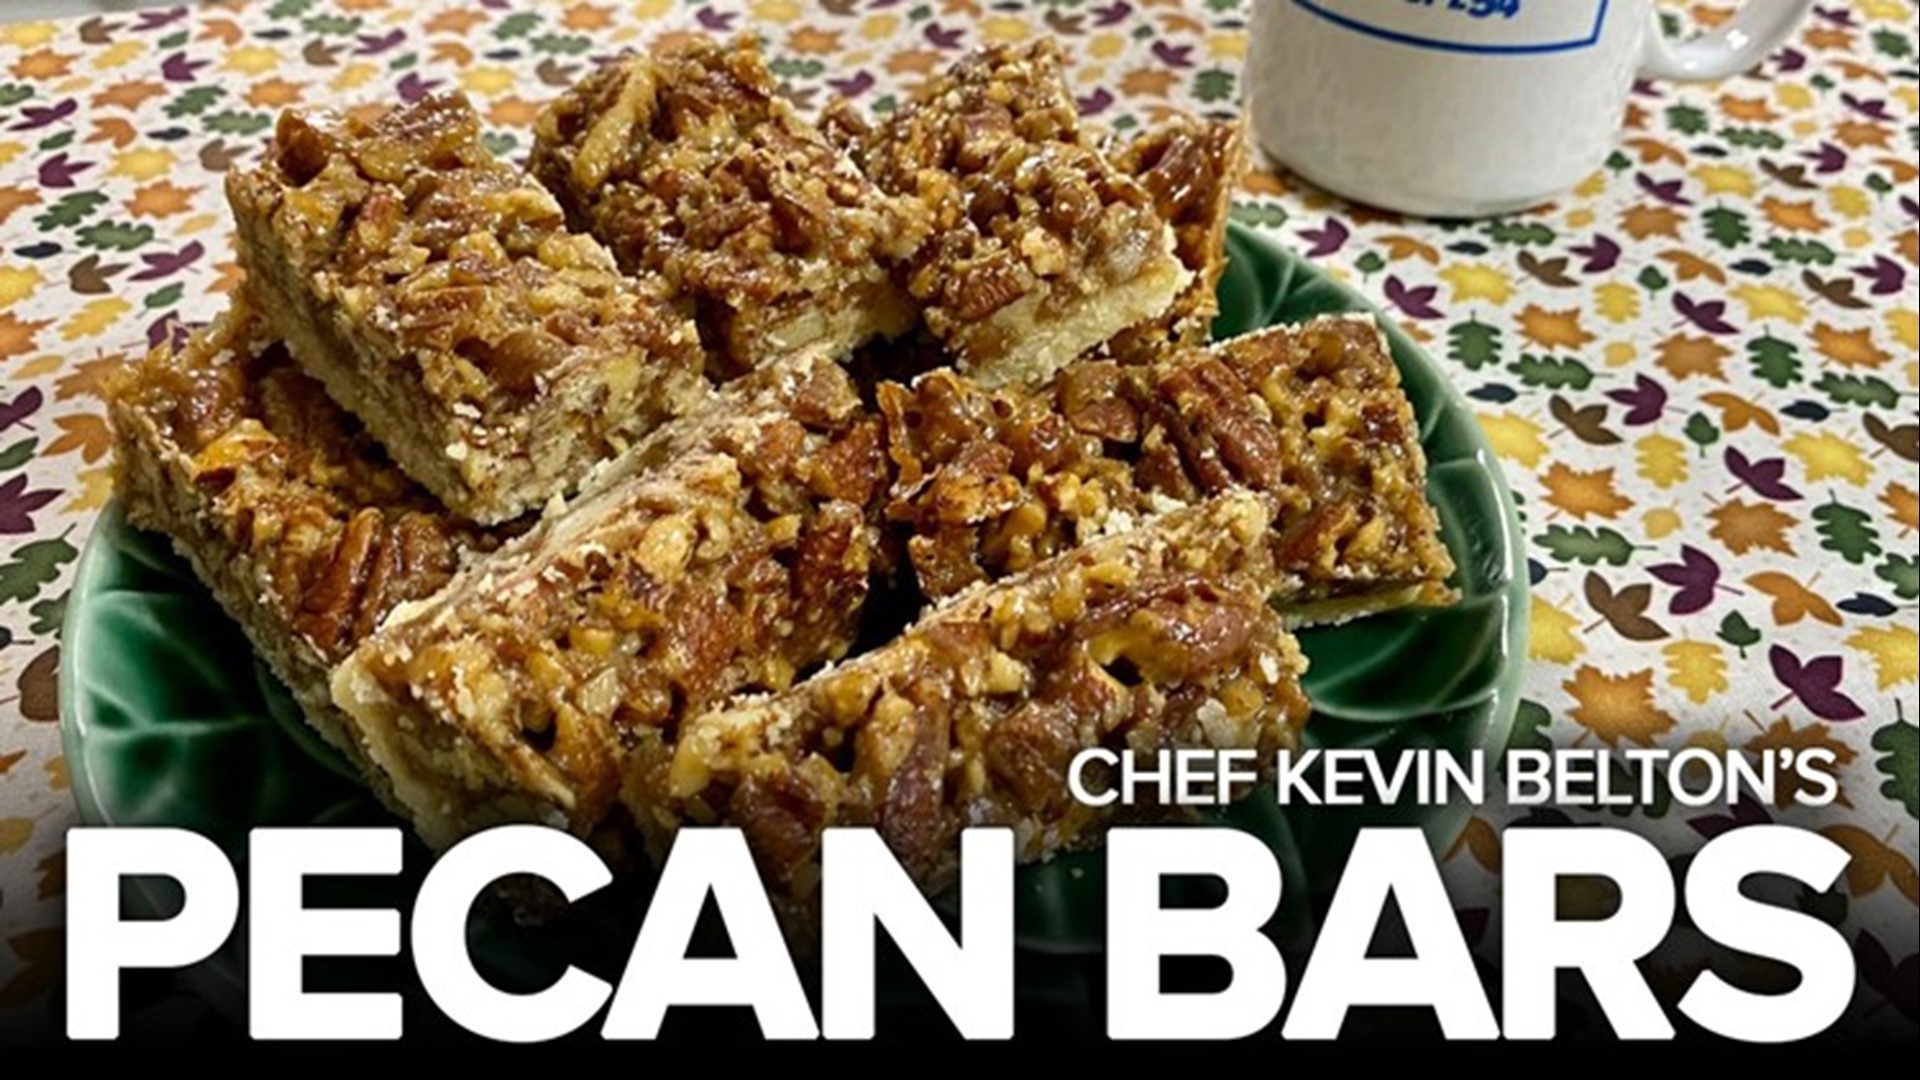 These Pecan Bars have all the sweet, sticky goodness of pecan pie, but they're so easy to make!